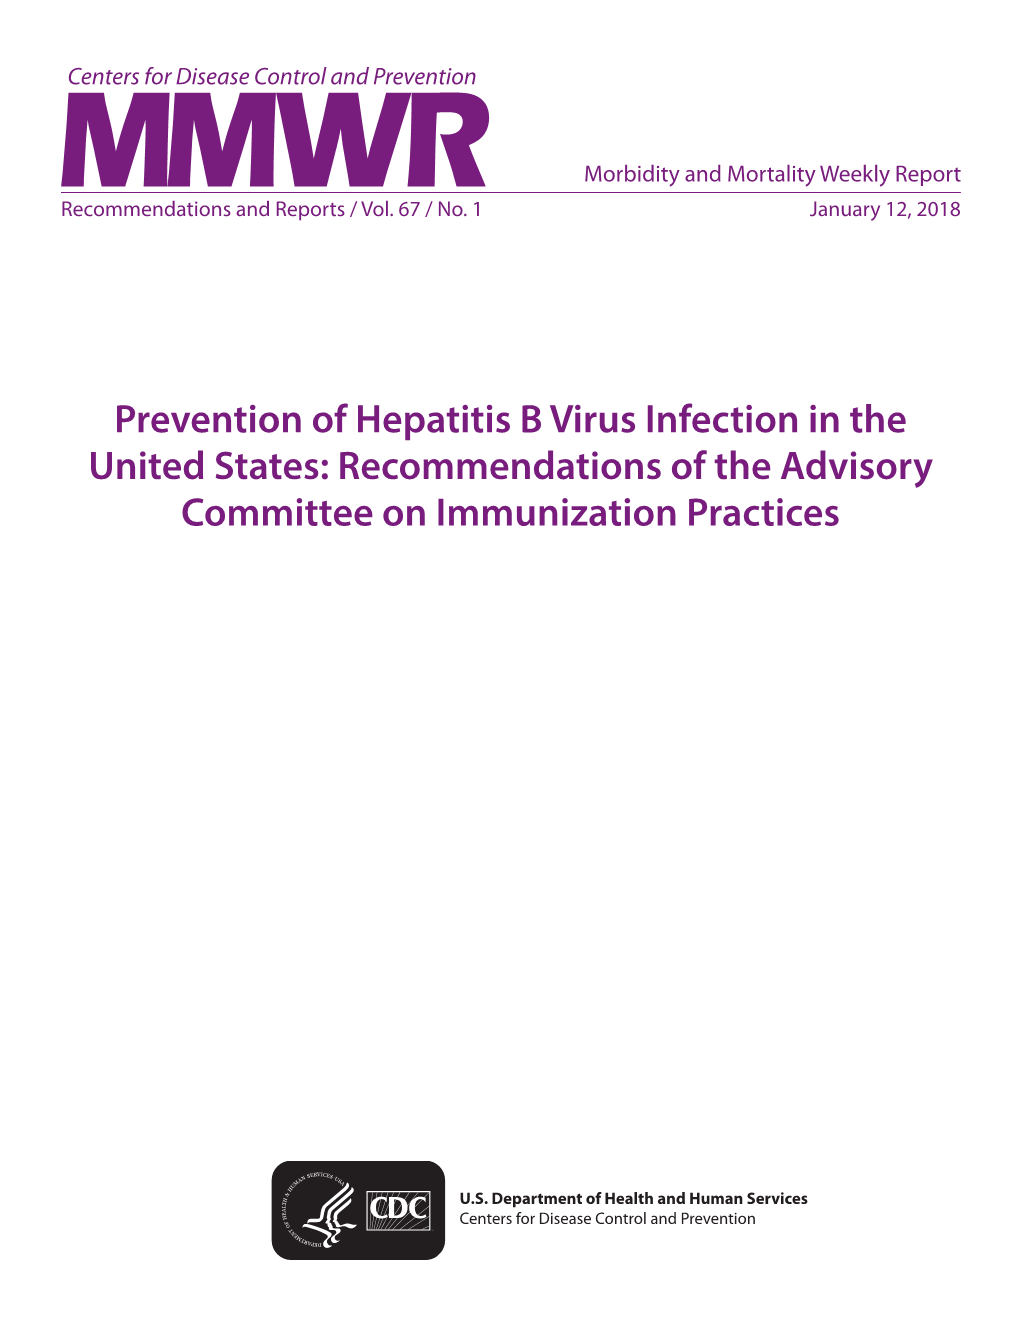 Prevention of Hepatitis B Virus Infection in the United States: Recommendations of the Advisory Committee on Immunization Practices